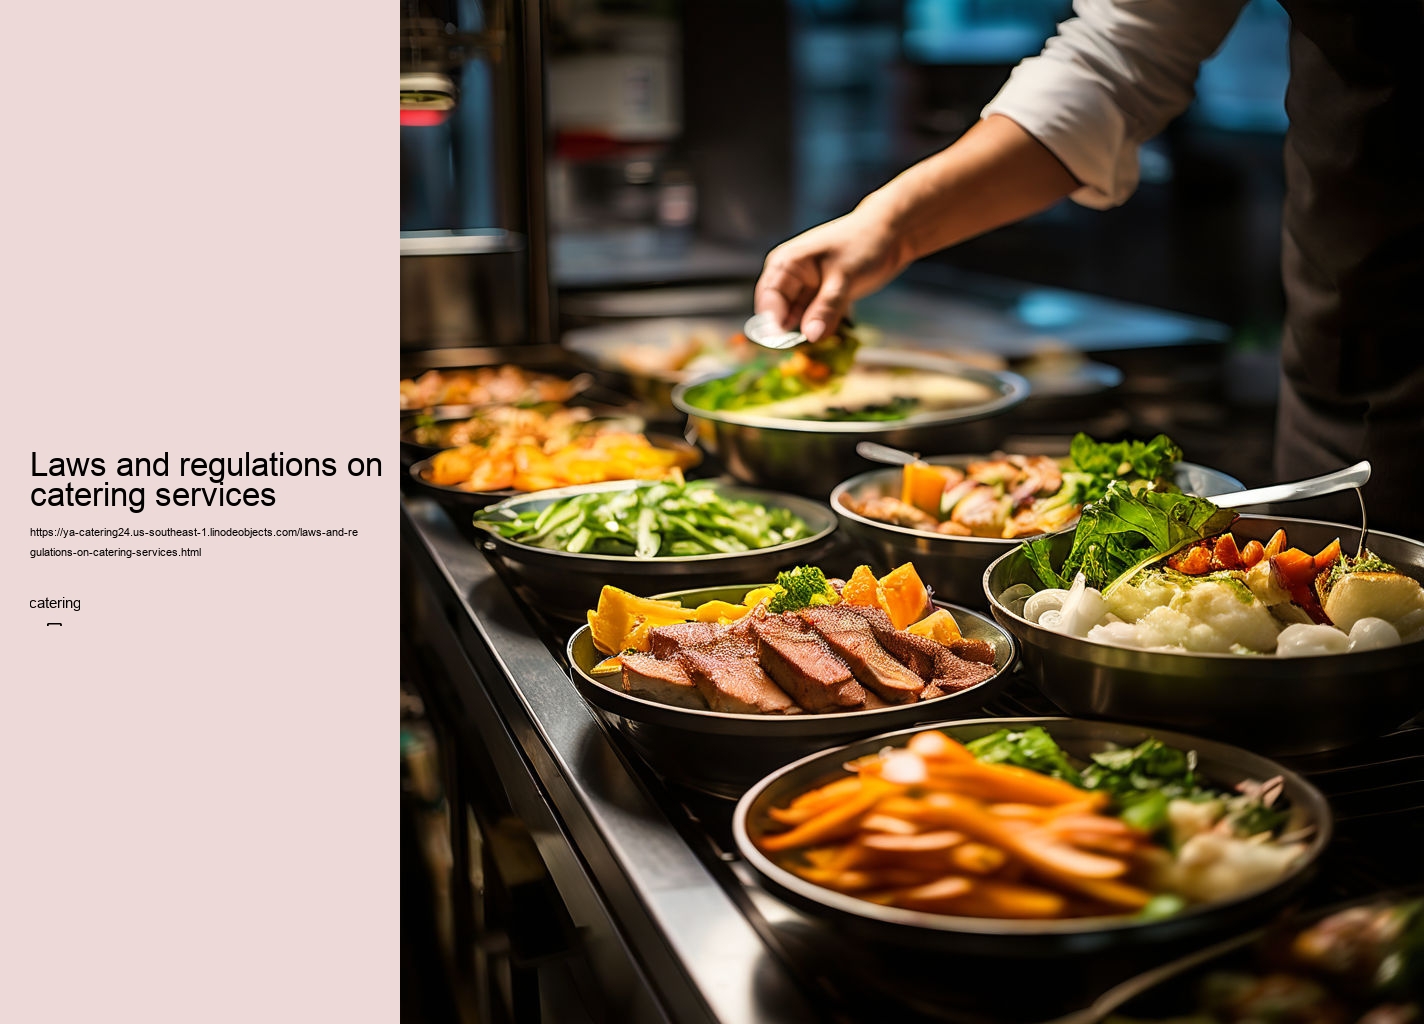 Laws and regulations on catering services